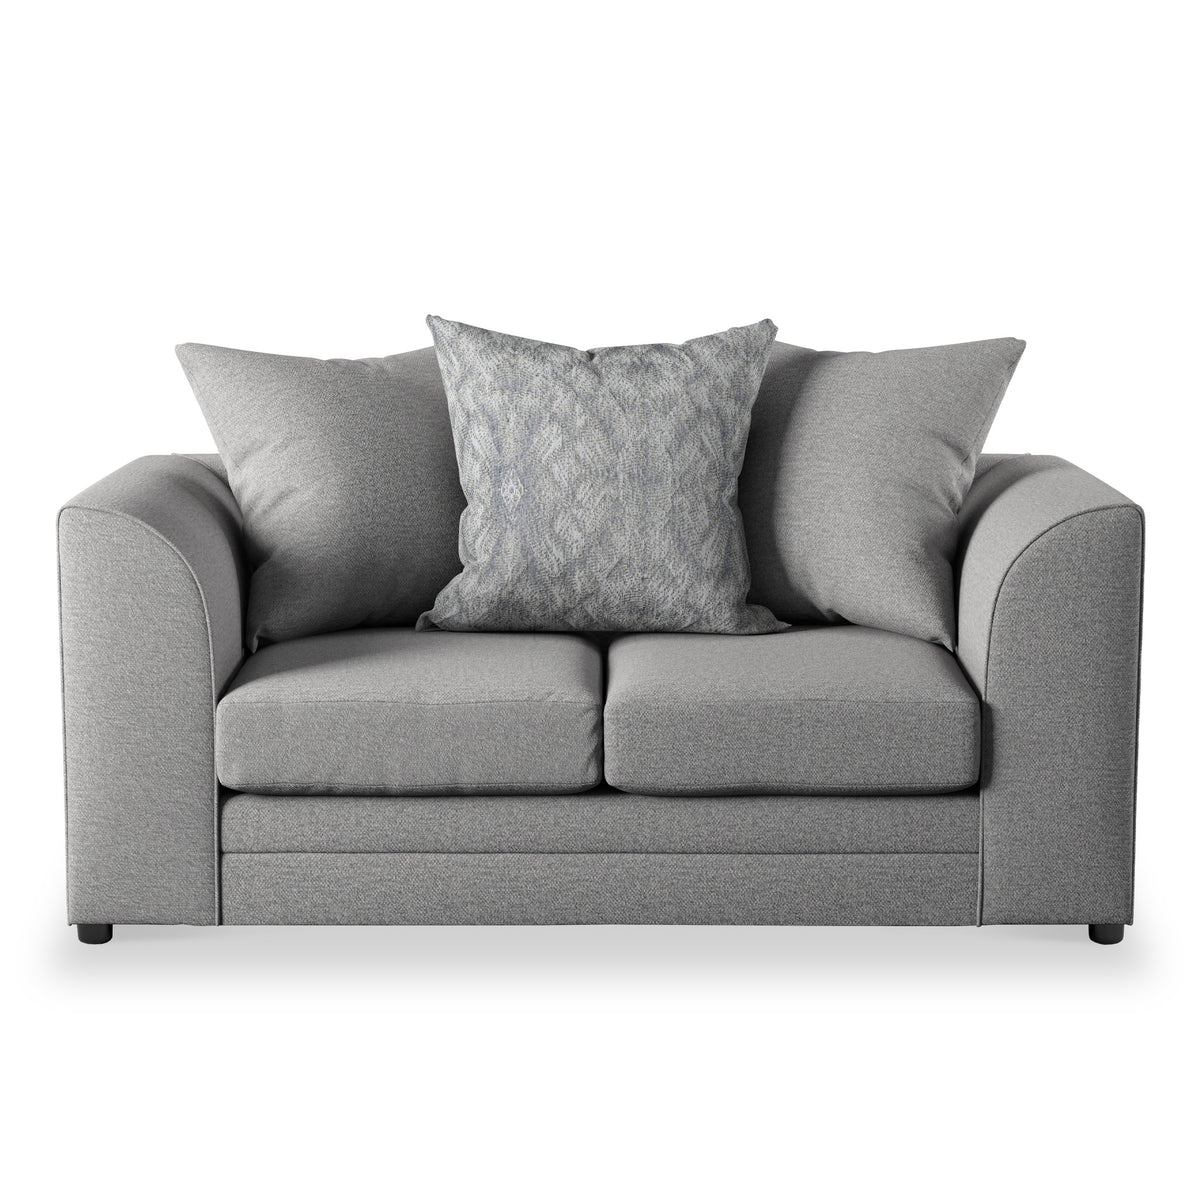 Tisha Grey 2 Seater couch